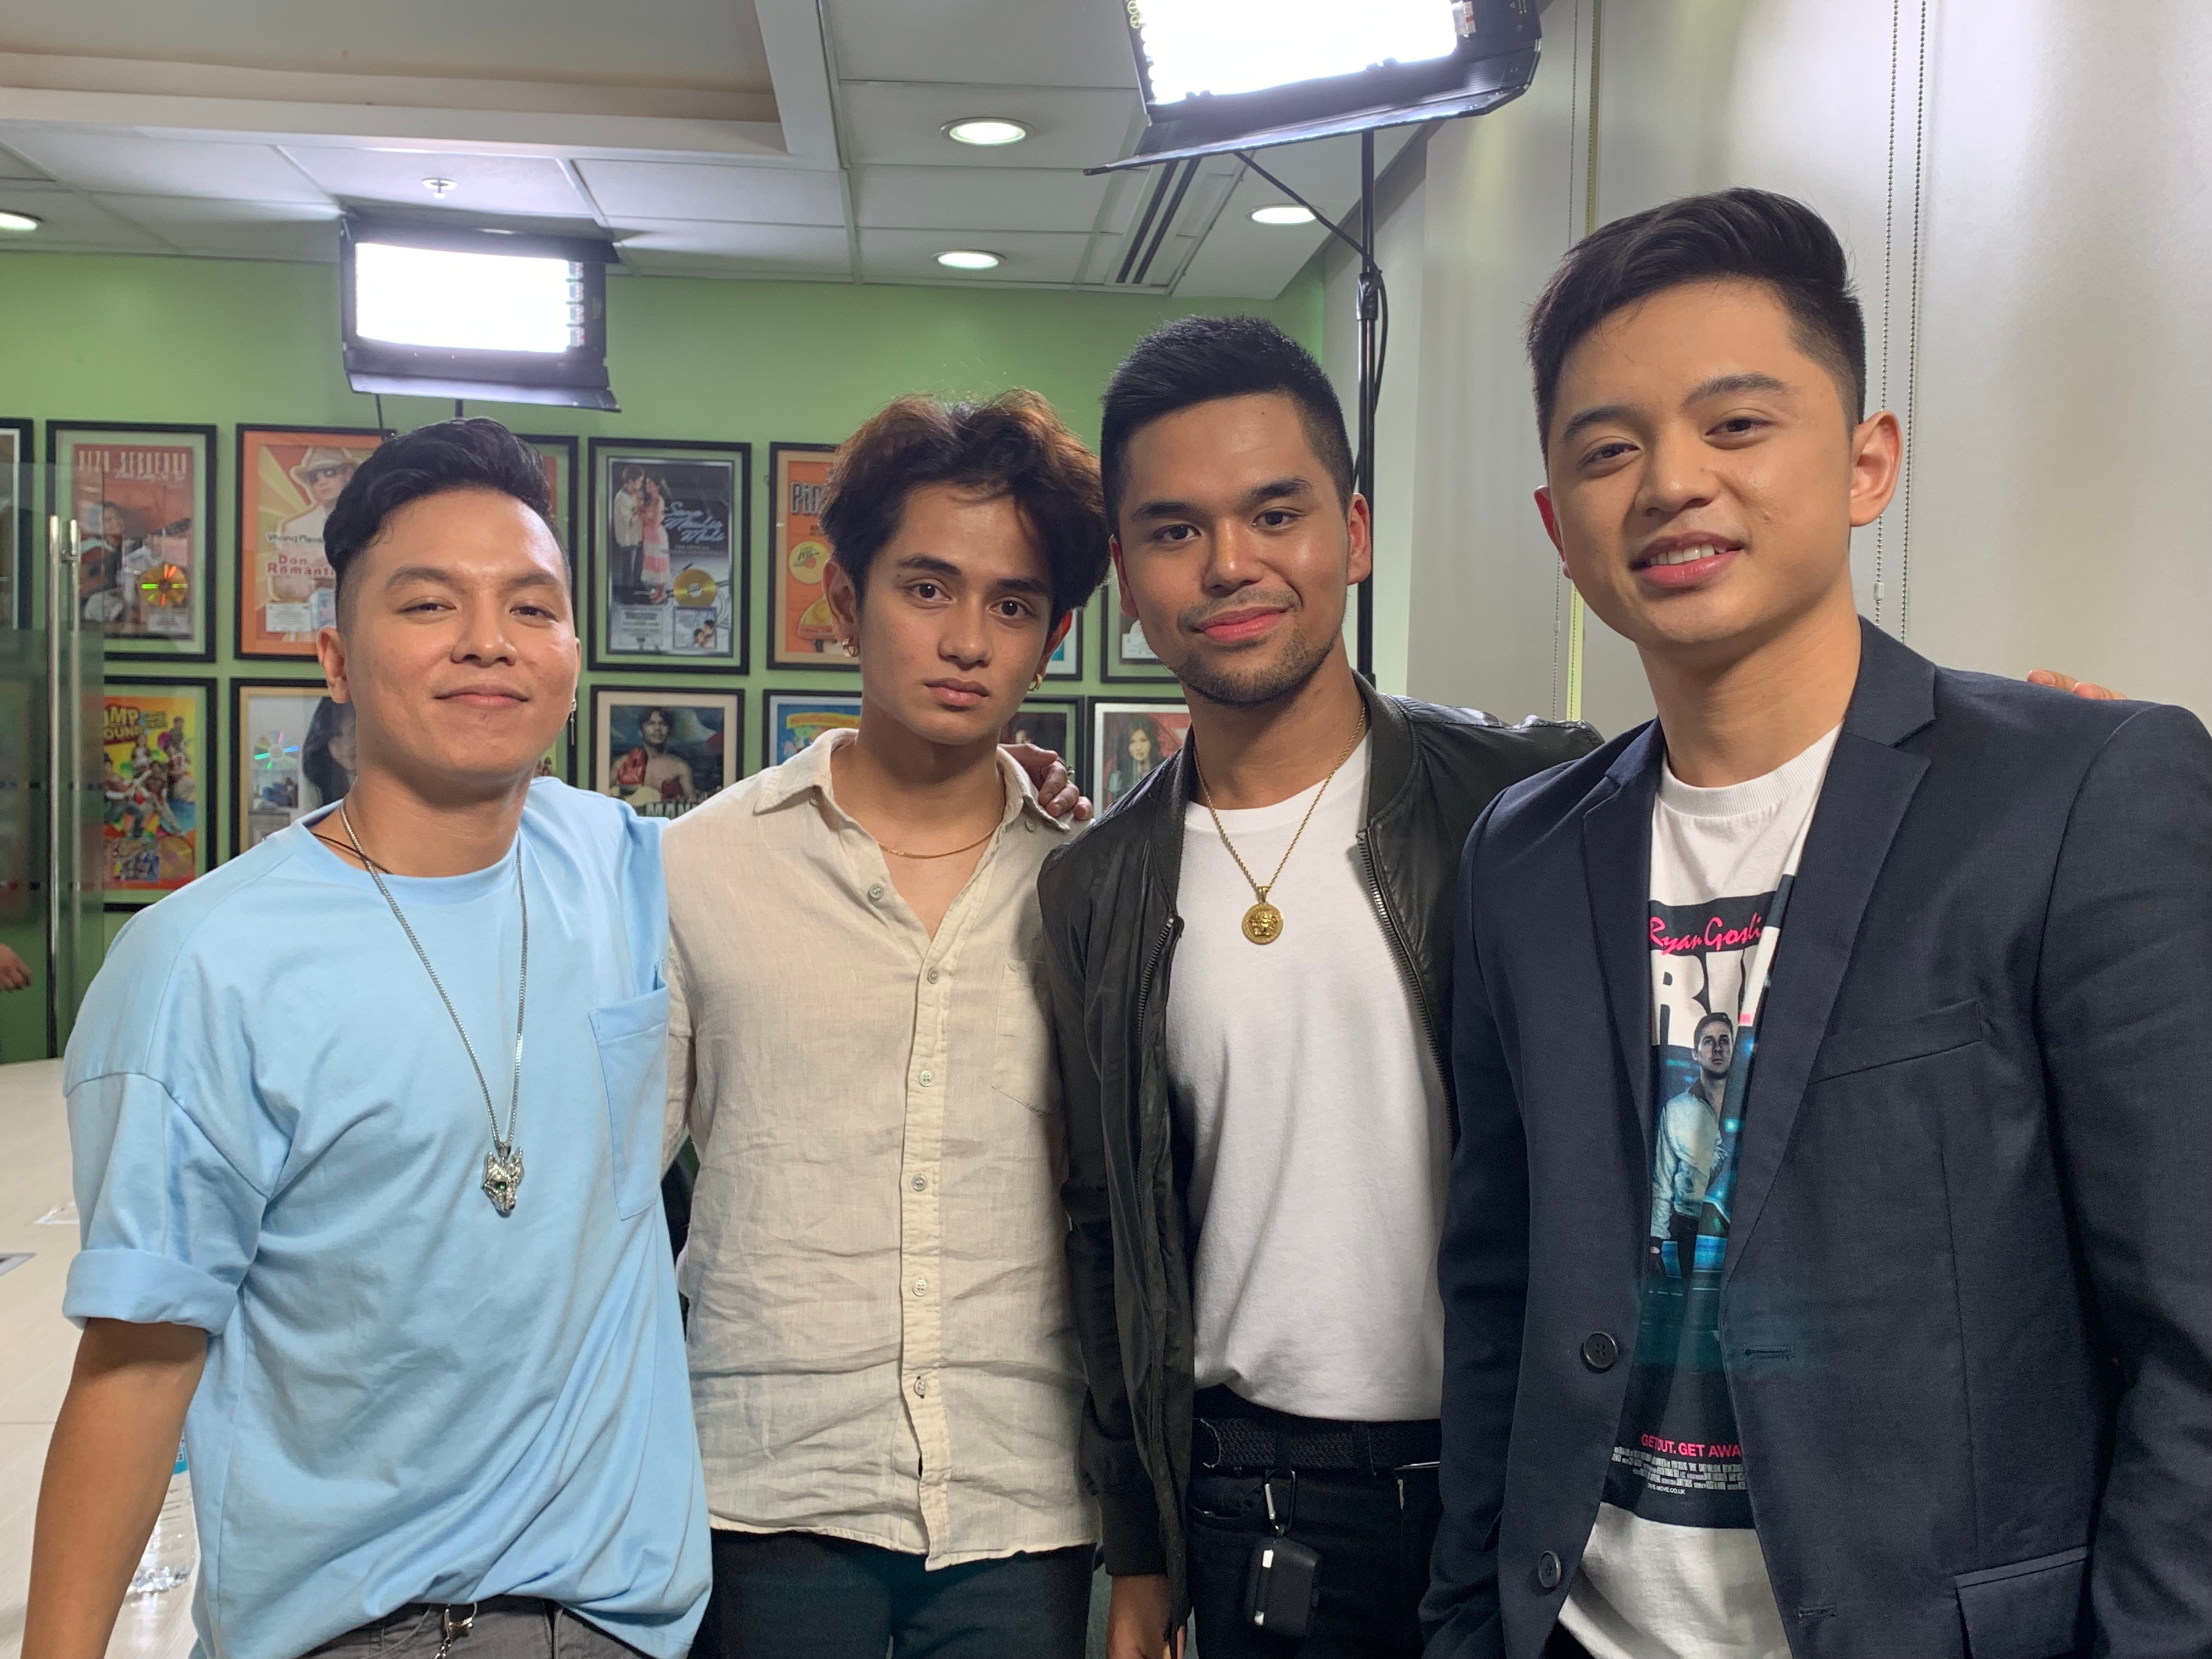 JMKO, Jeremy G, Miguel and Sam headline "Song Feels" concert